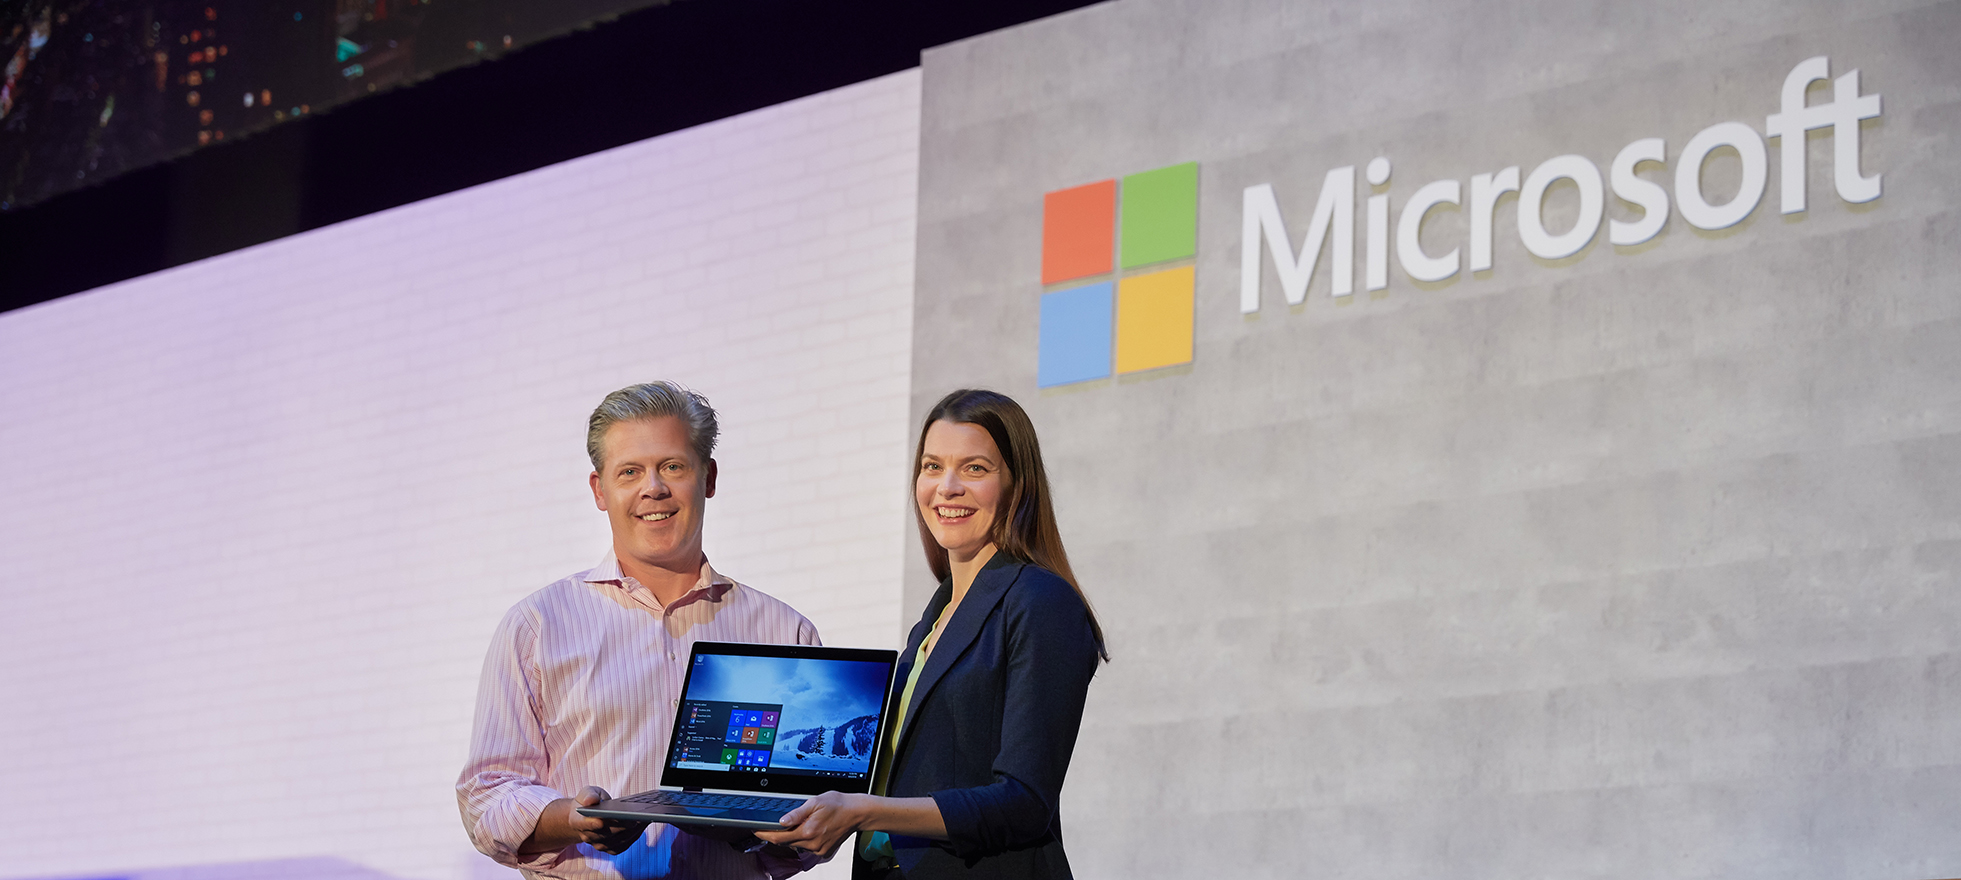 Nick Parker and Roanne Sones hold the new HP ProBook x360 on stage